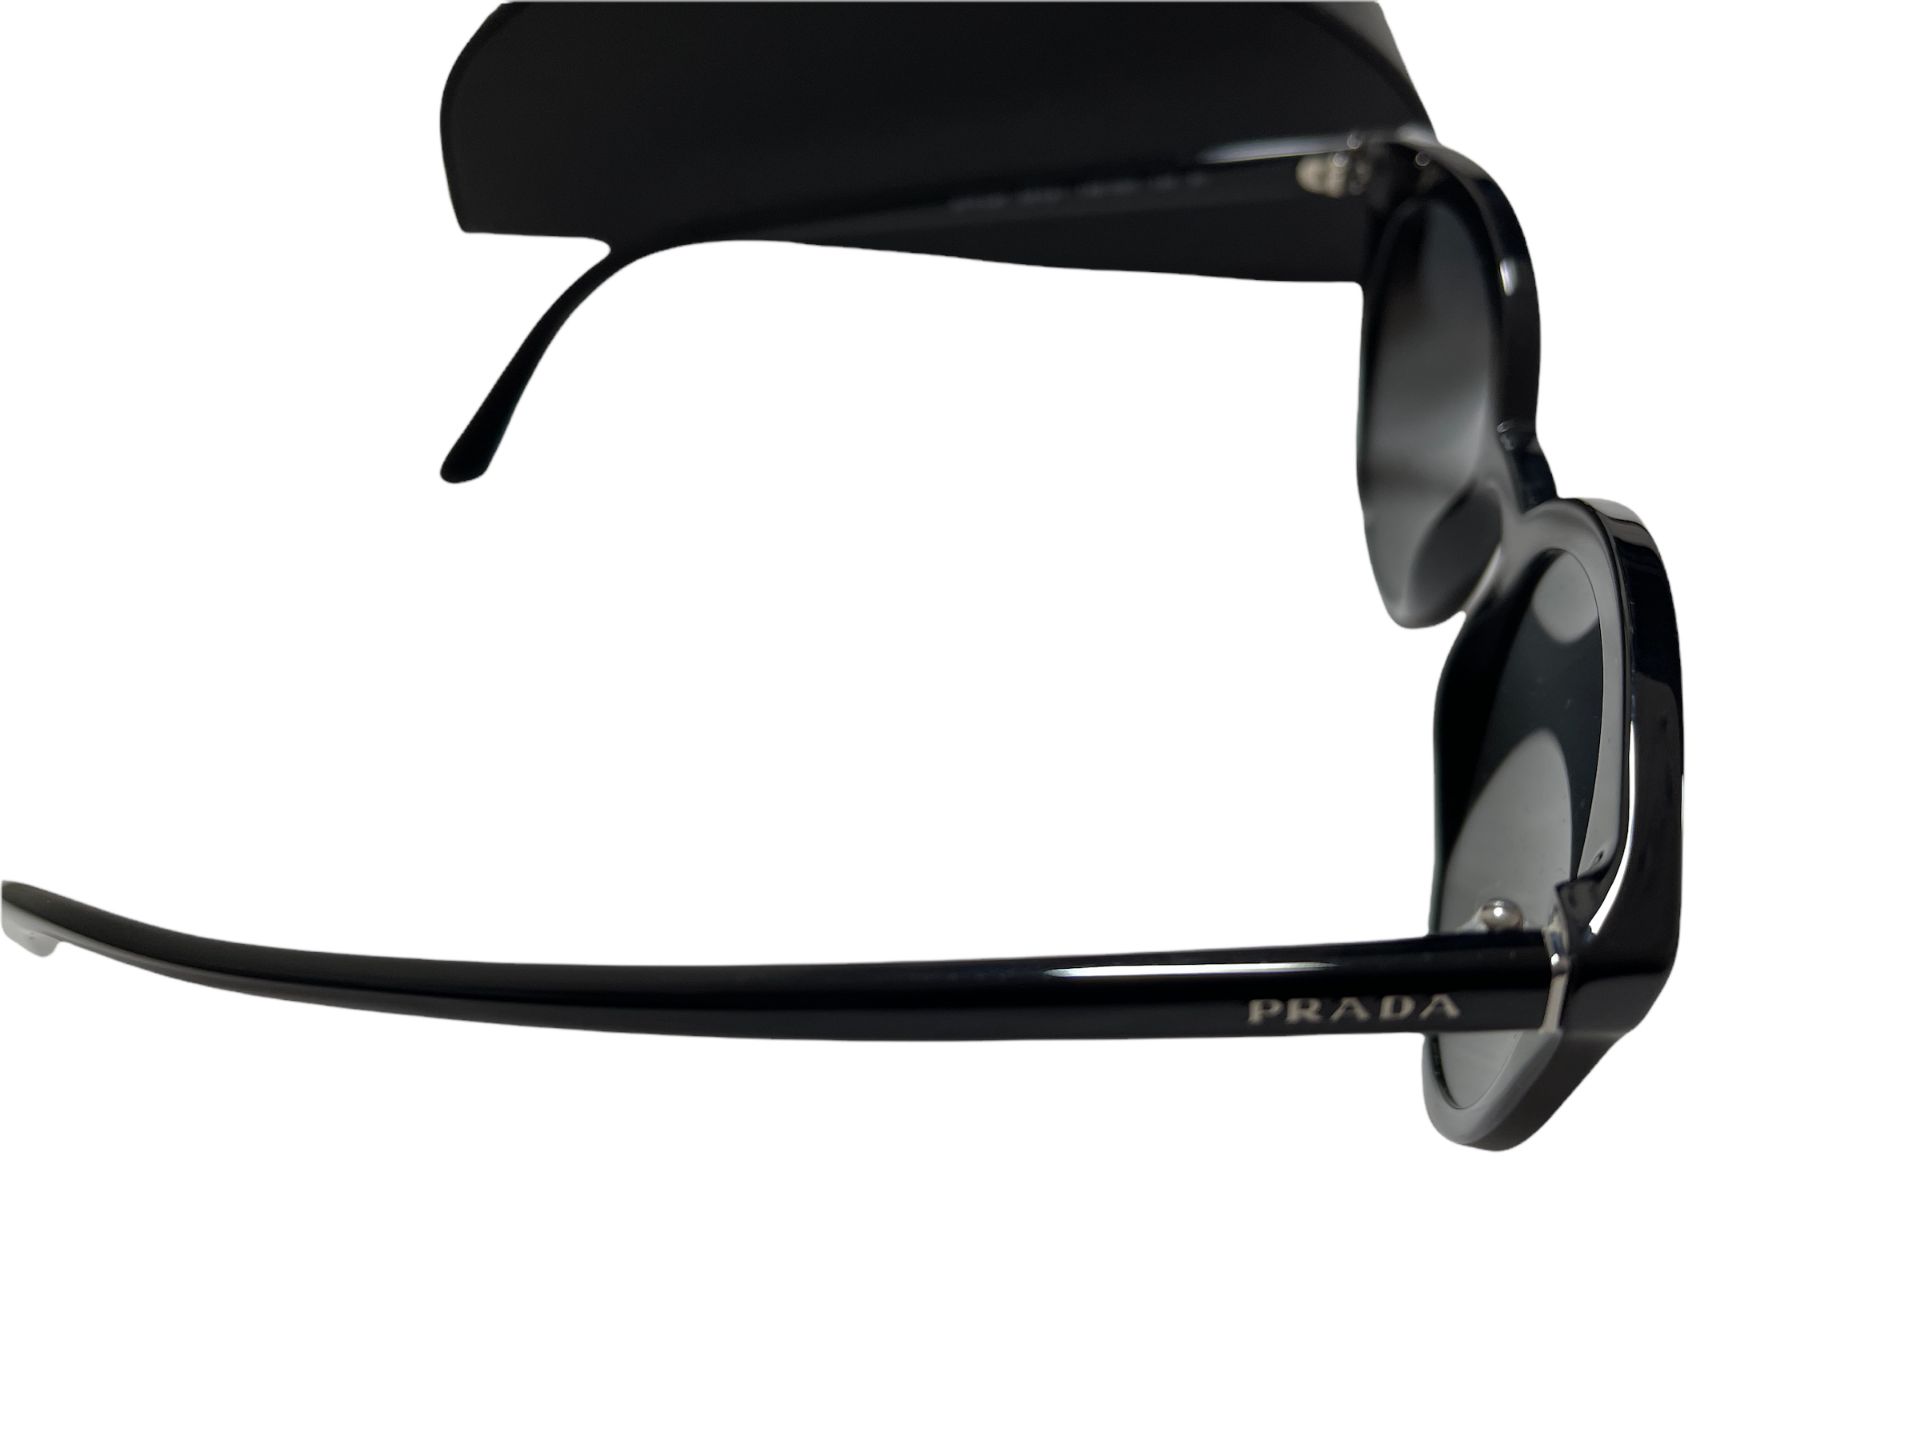 Prada Sunglasses (PR02XS 1AB5S0 53) - Surplus Stock from our Private Jet Charter - Image 8 of 9